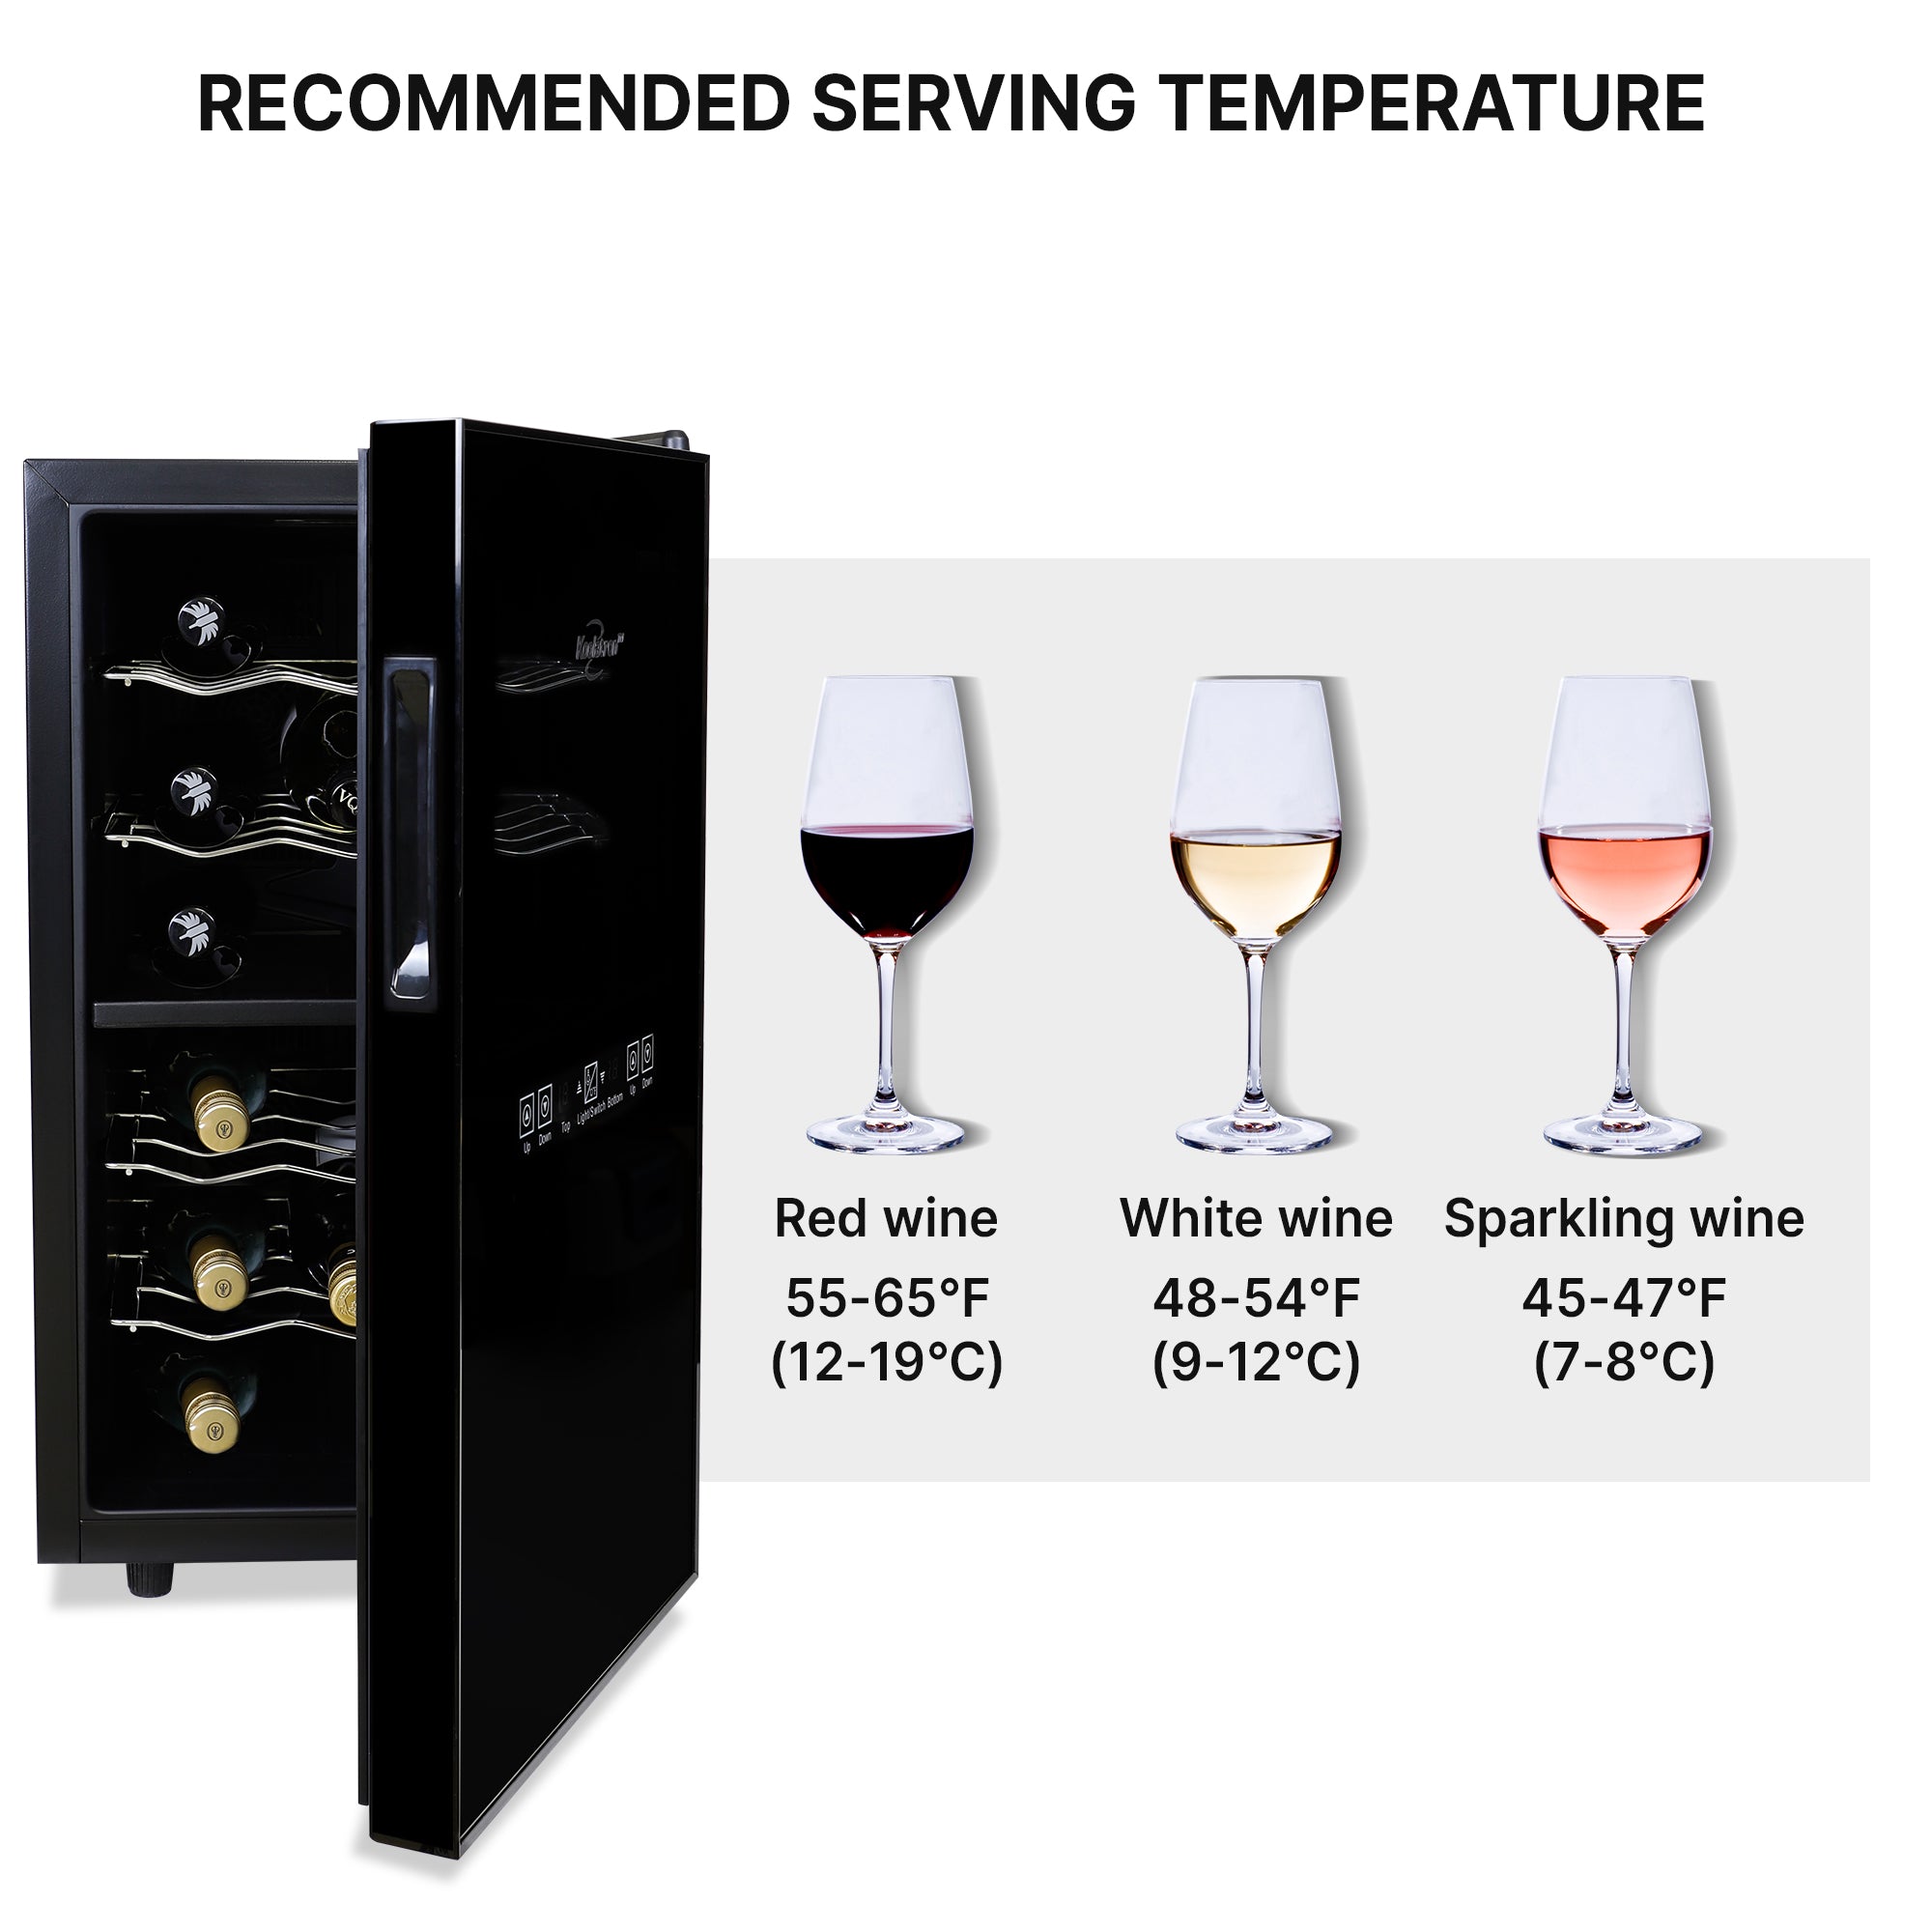 Koolatron 18 bottle wine fridge, open, with pictures of three wine glasses to the right containing red, white, and rose wines; Text above reads "Recommended serving temperature" and text below each glass describes the ideal temperature